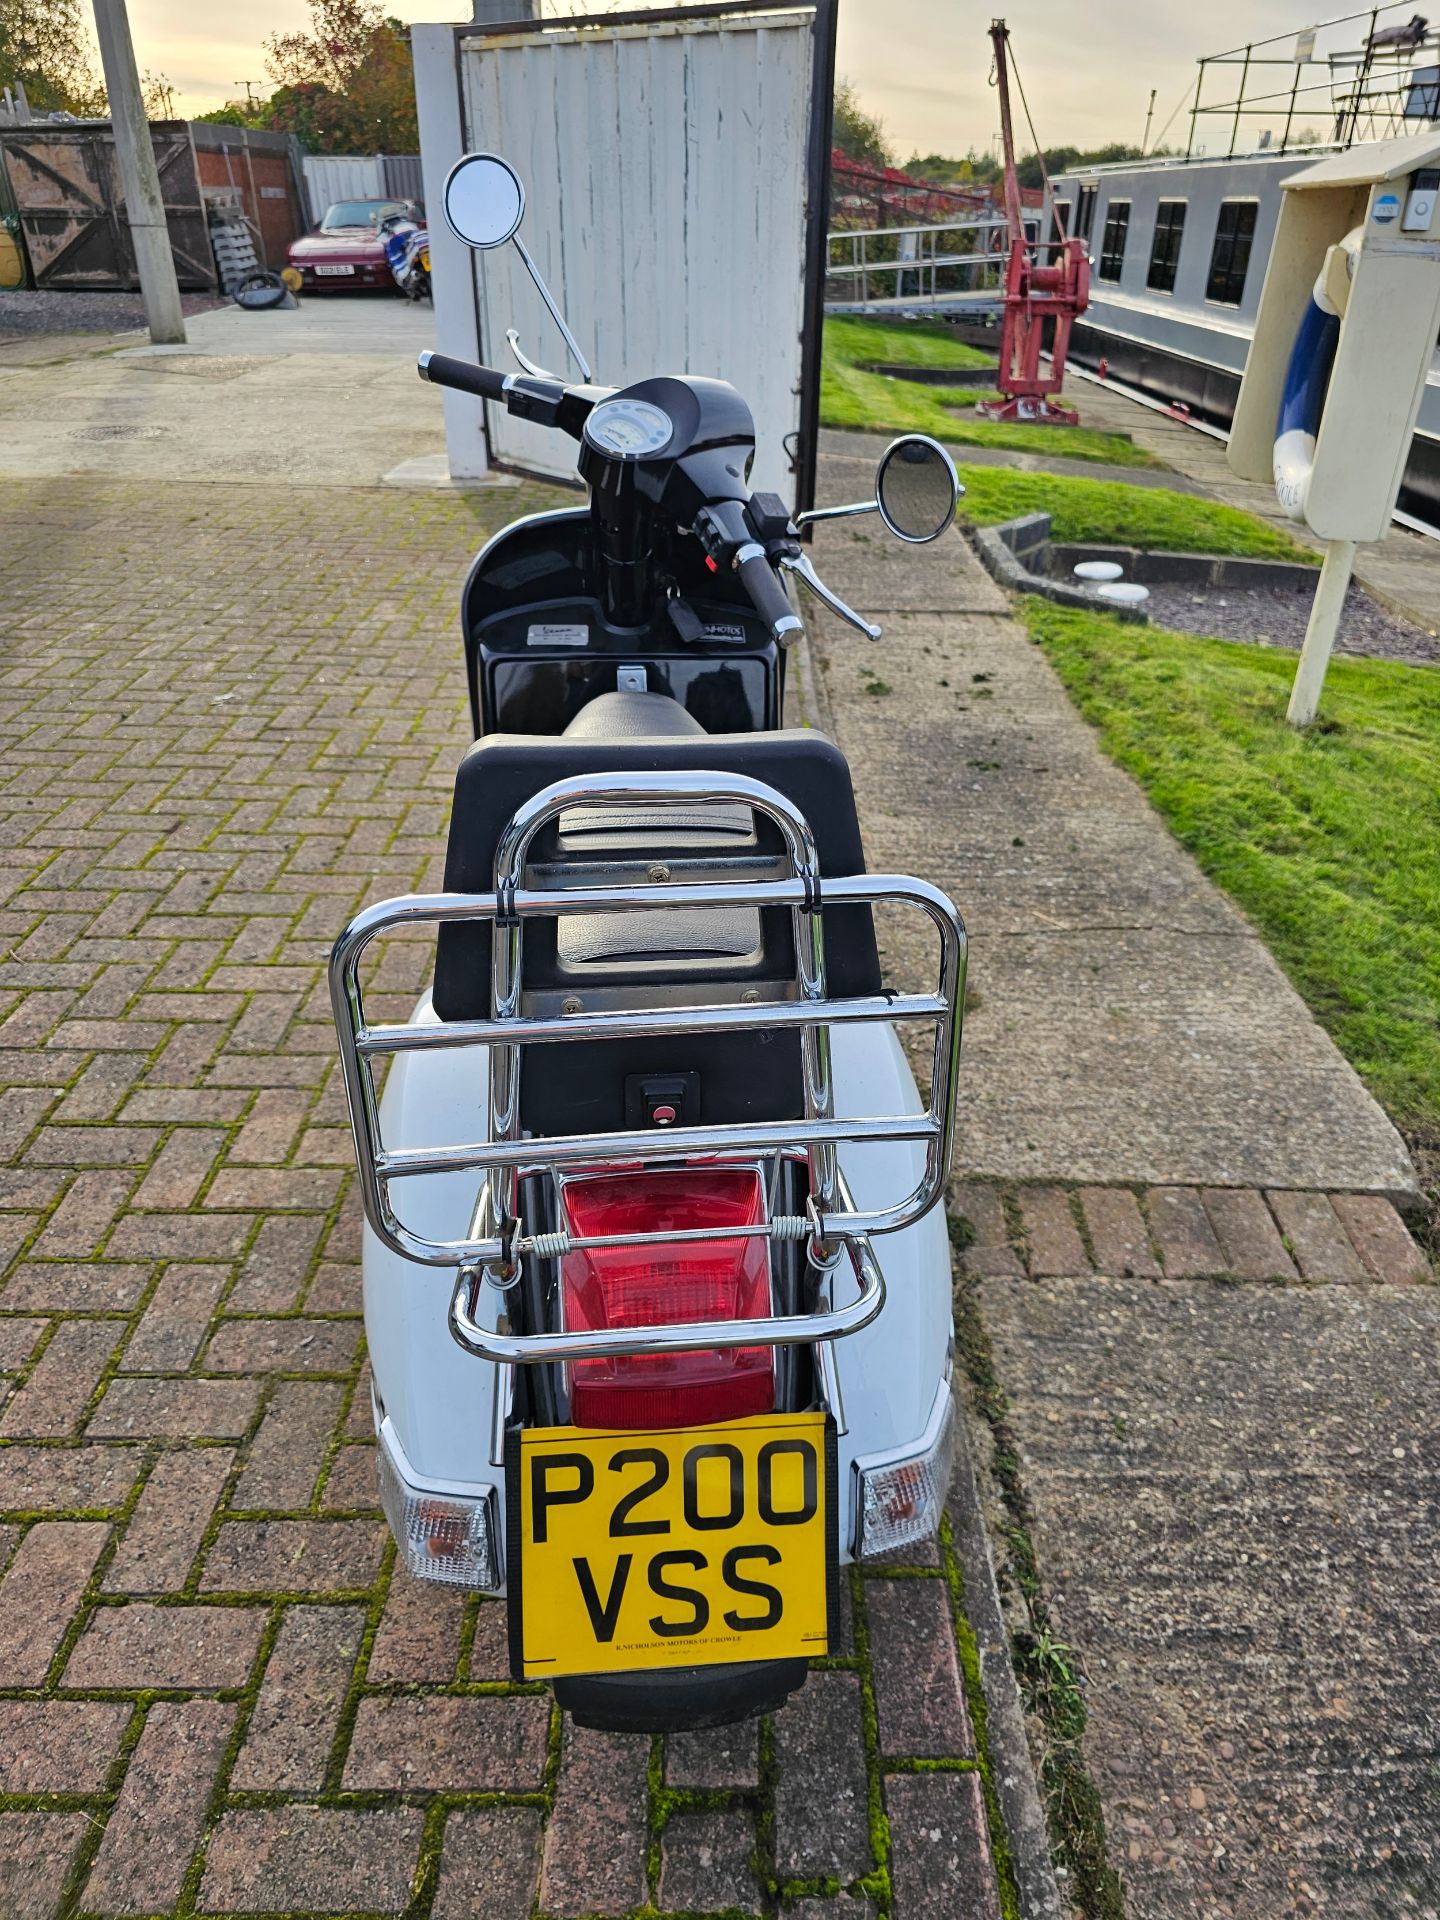 2003 Piaggio Vespa PX200 Serie Speciale Limited Edition 102/400, 198cc. Registration number P200 - Image 4 of 9